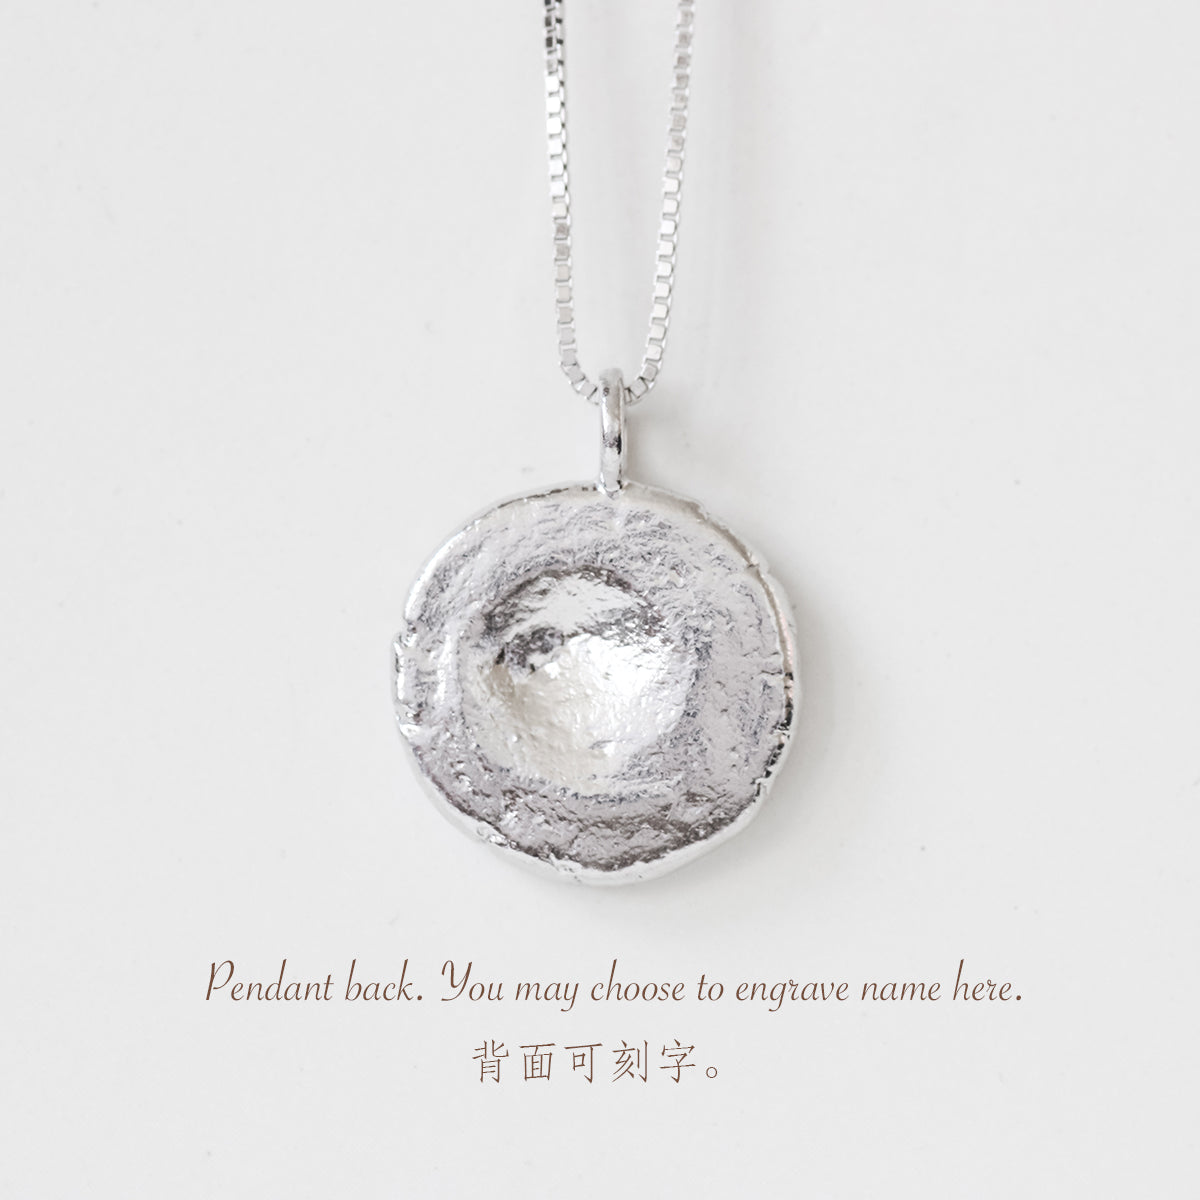 Words Heal - Empowerment Diamond Silver Necklace